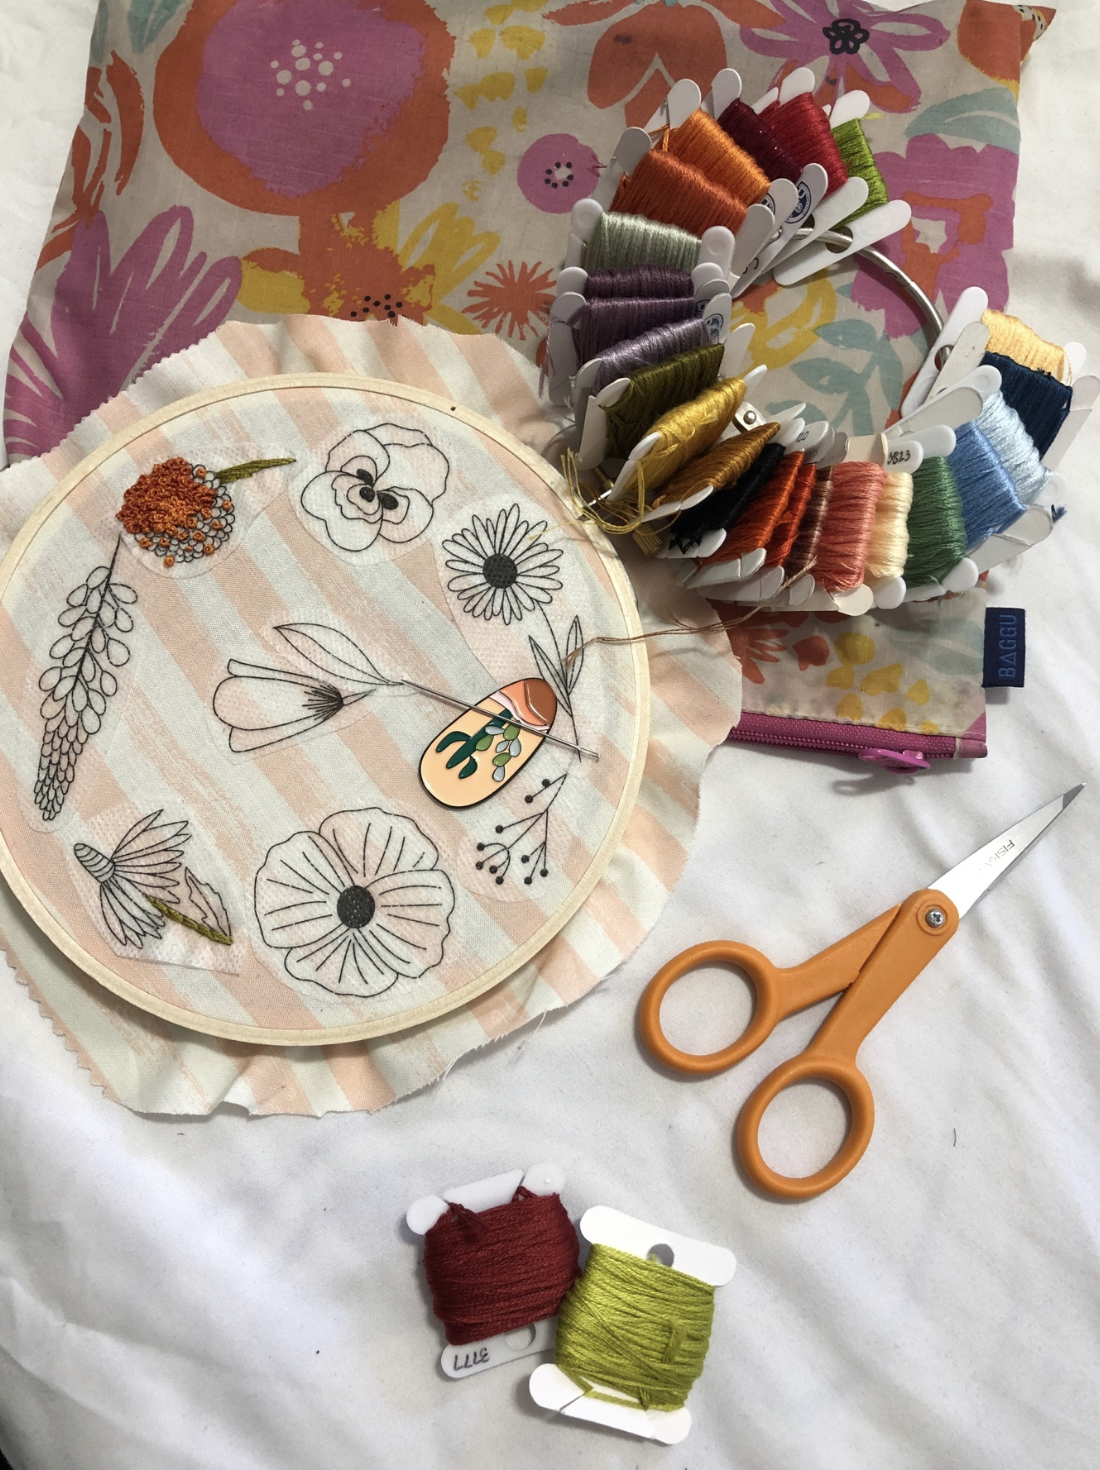 Embroidery Essentials: Craft Supplies to Make Hand Embroidery